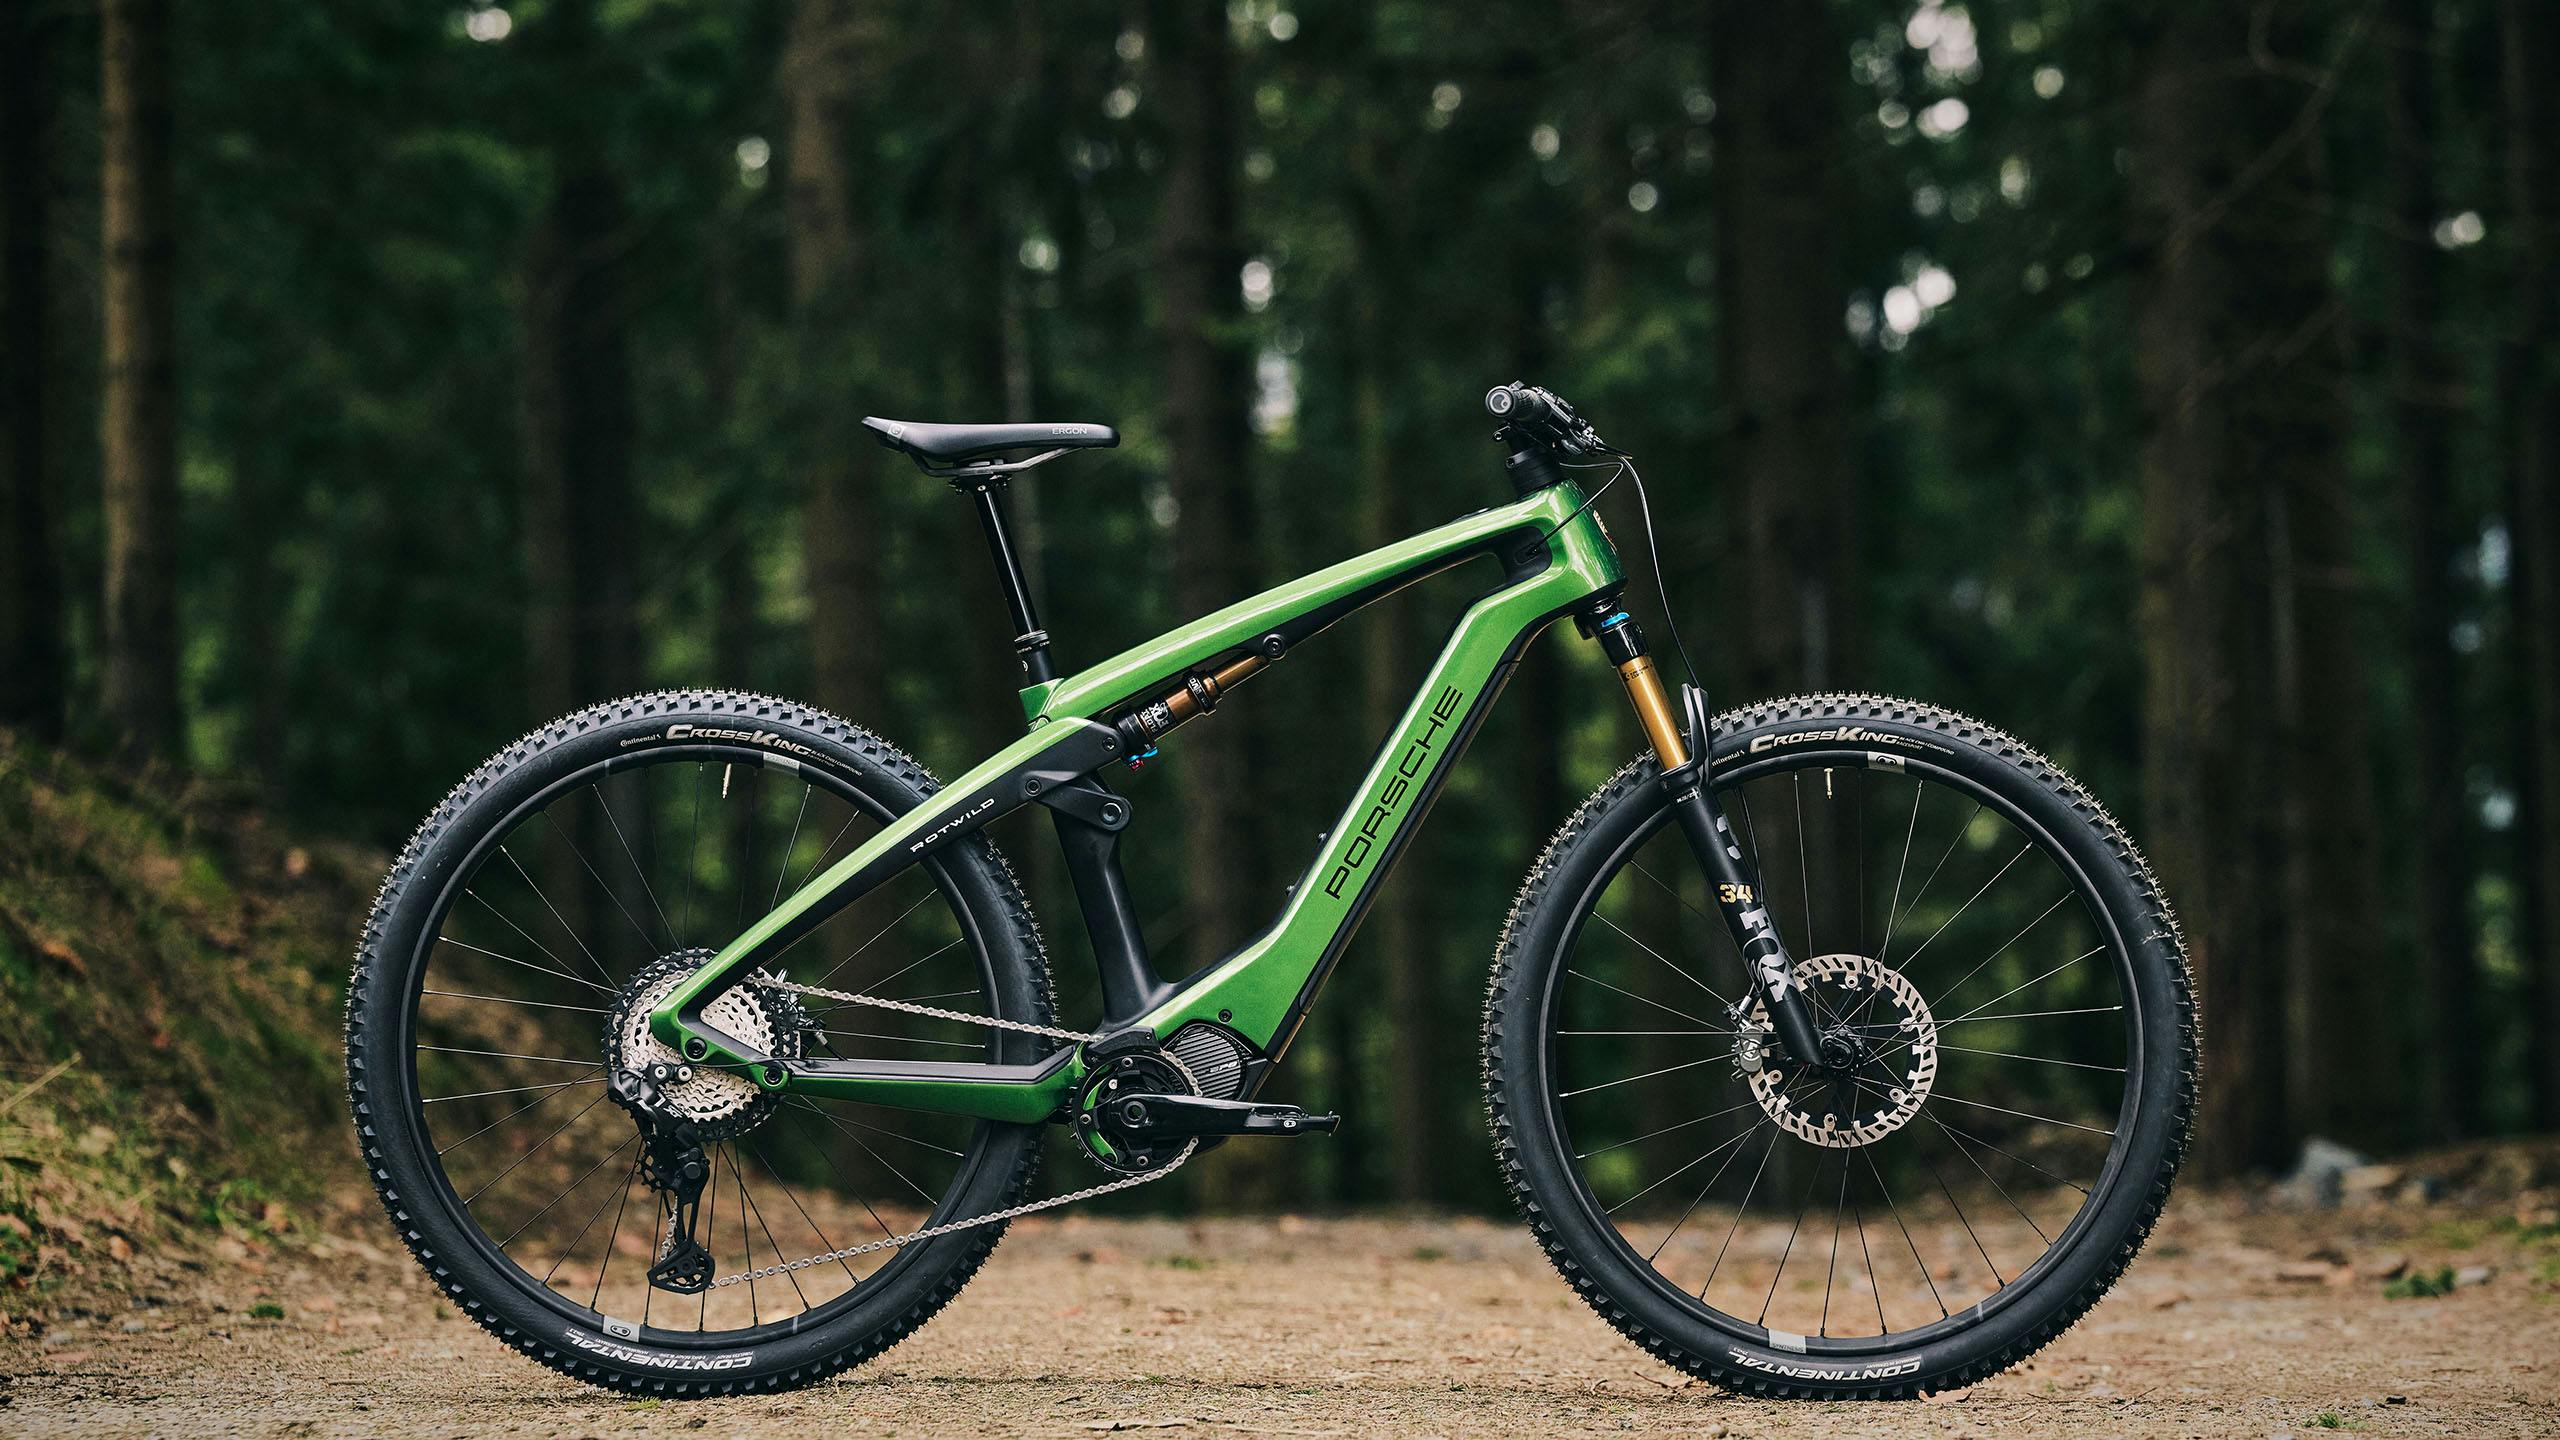 On display is the green Porsche eBike Cross Performance EXC.